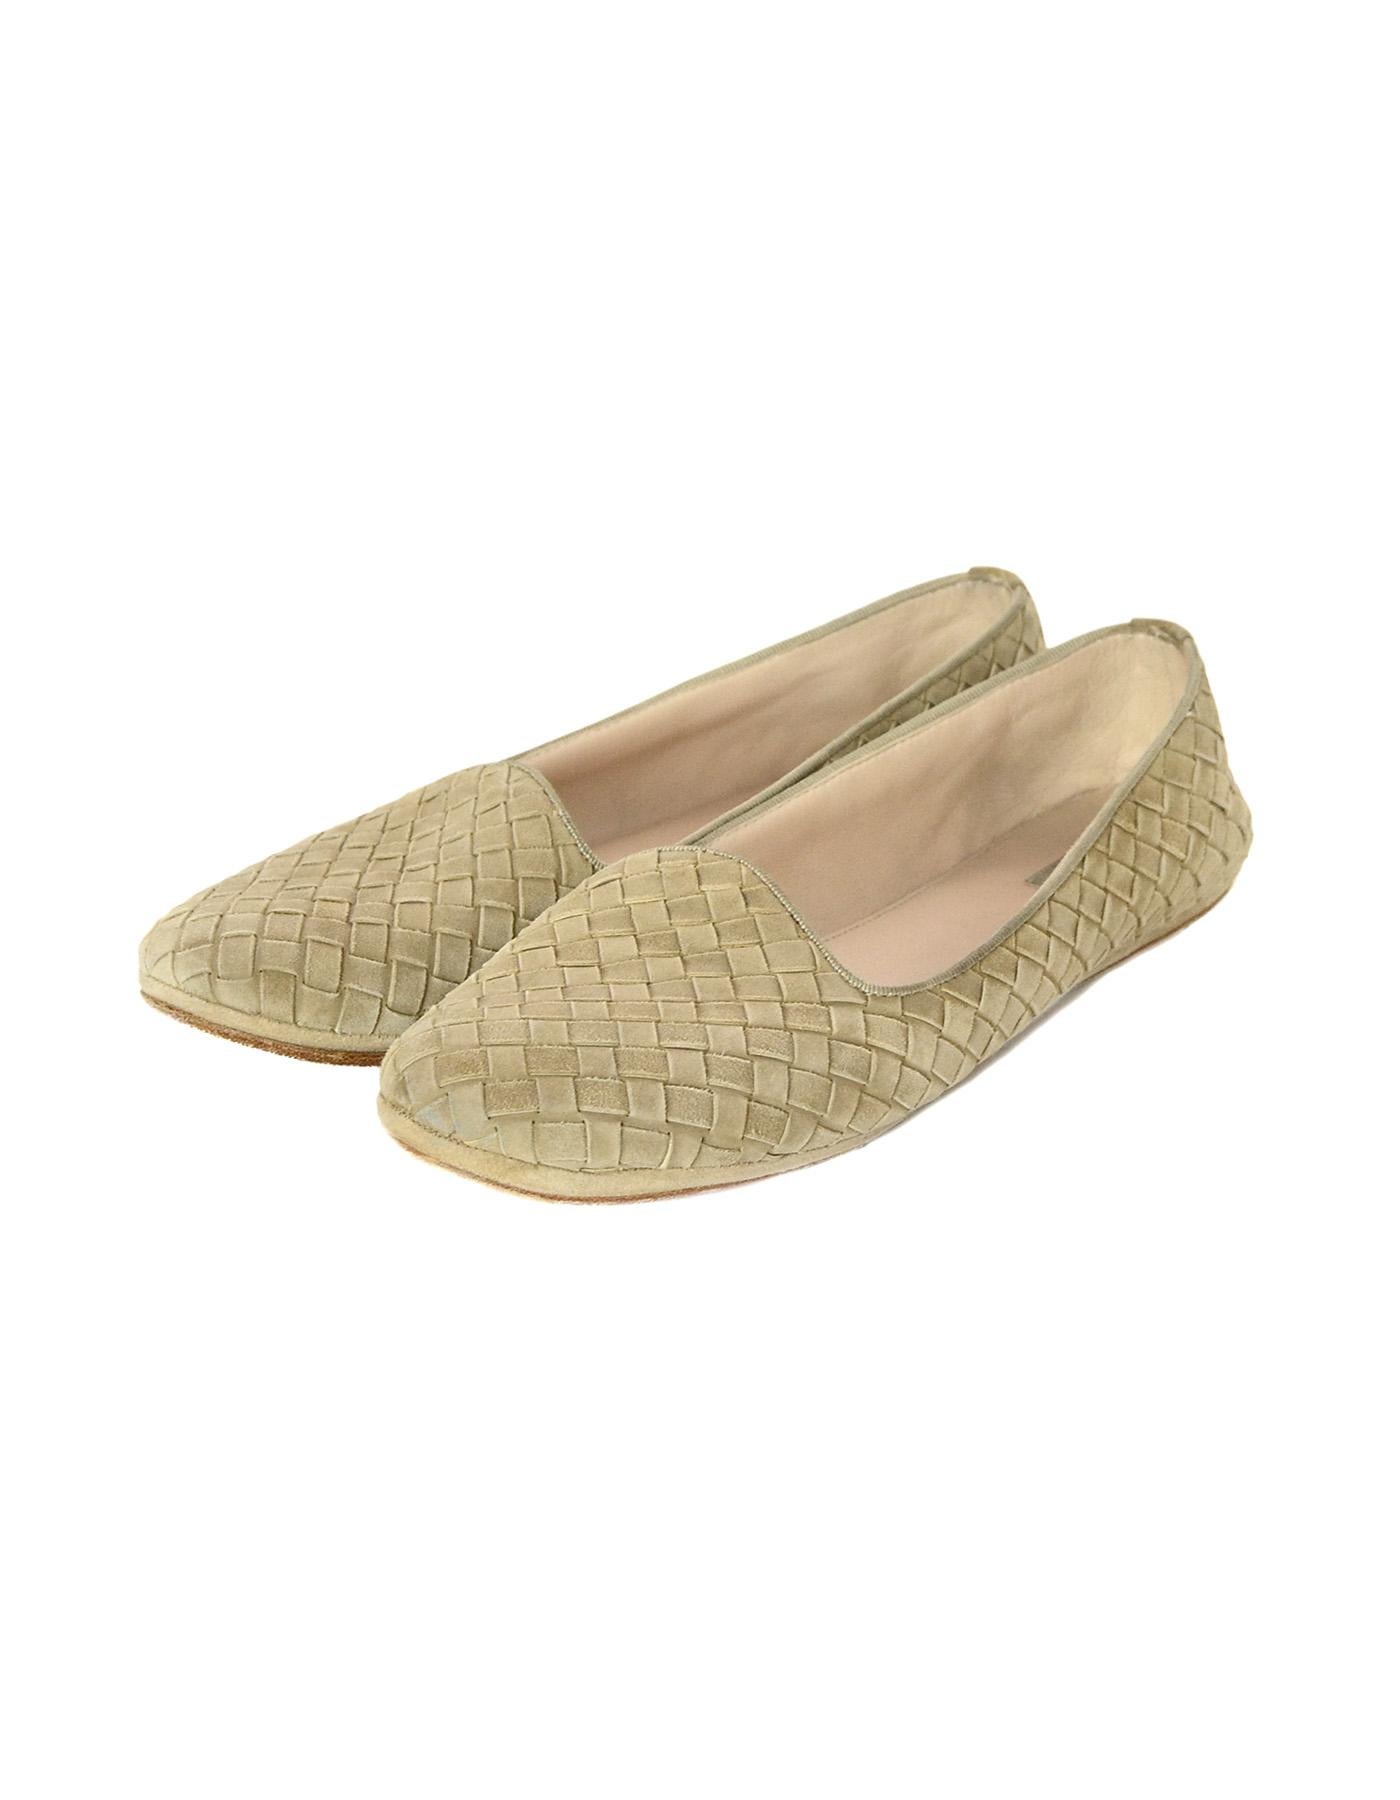 Bottega Veneta Beige Suede Woven Loafers Sz 38.5

Made In: Italy
Color: Beige
Materials: Suede
Closure/Opening: Slide on
Overall Condition: Excellent pre-owned condition with minor marks in suede and wear on soles

Measurements: 
Marked Size: